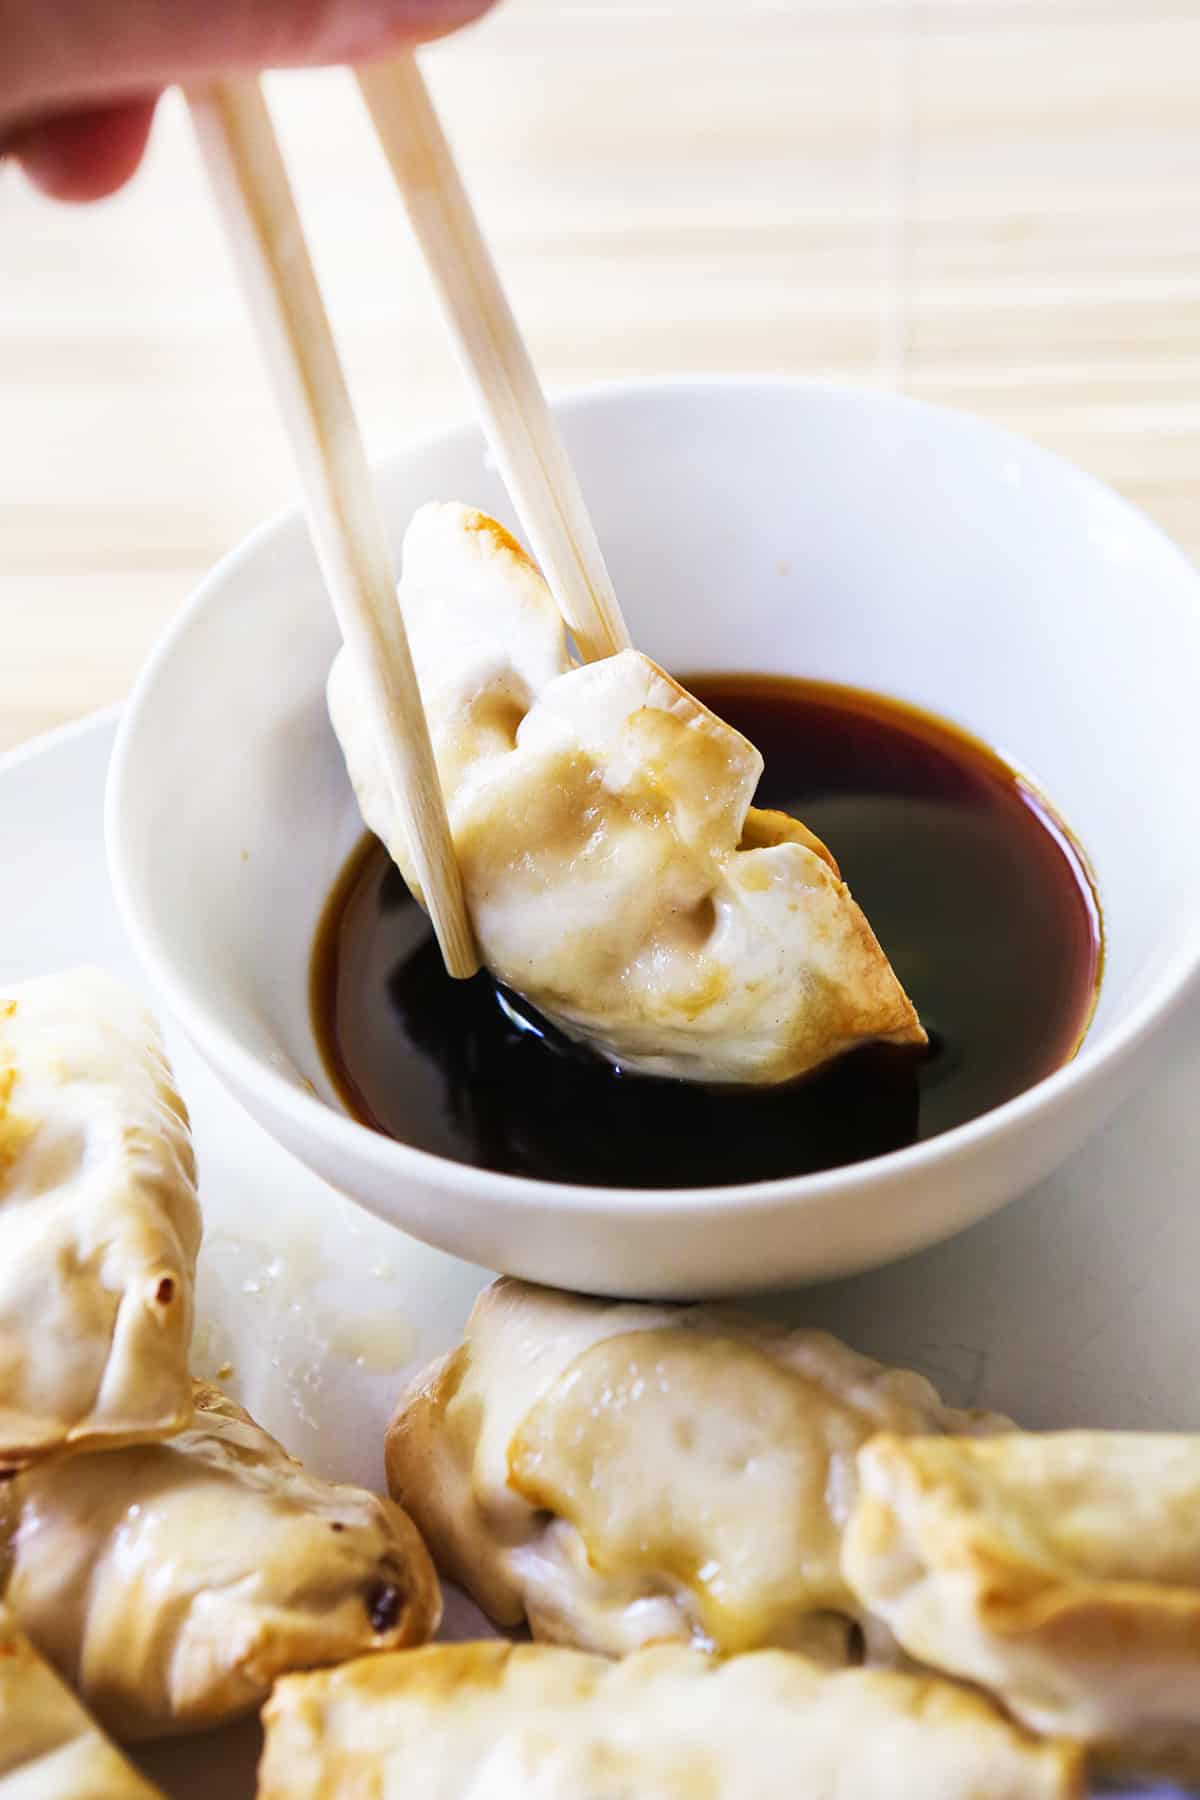 Chopsticks dipping a potsticker into a small bowl of soy sauce.